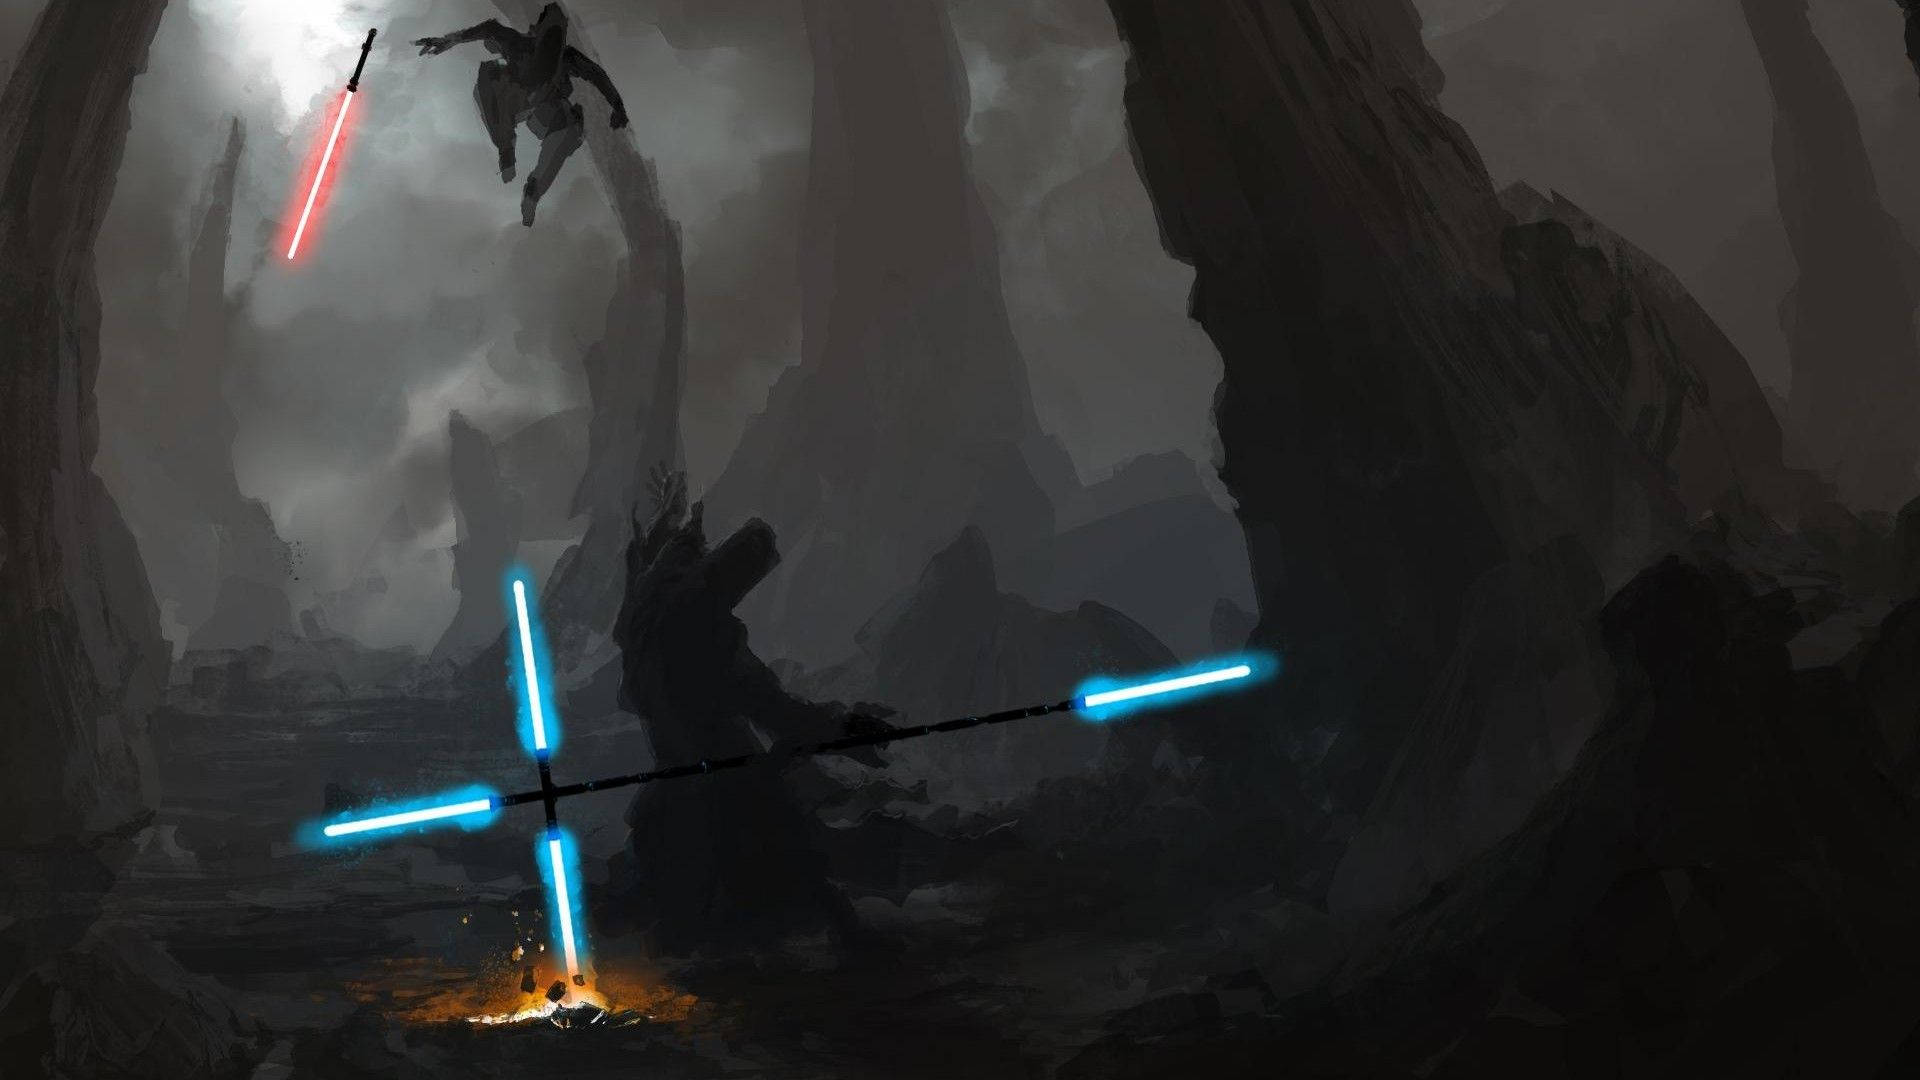 The Mandalorian and Baby Yoda in an Action-Packed Adventure Wallpaper